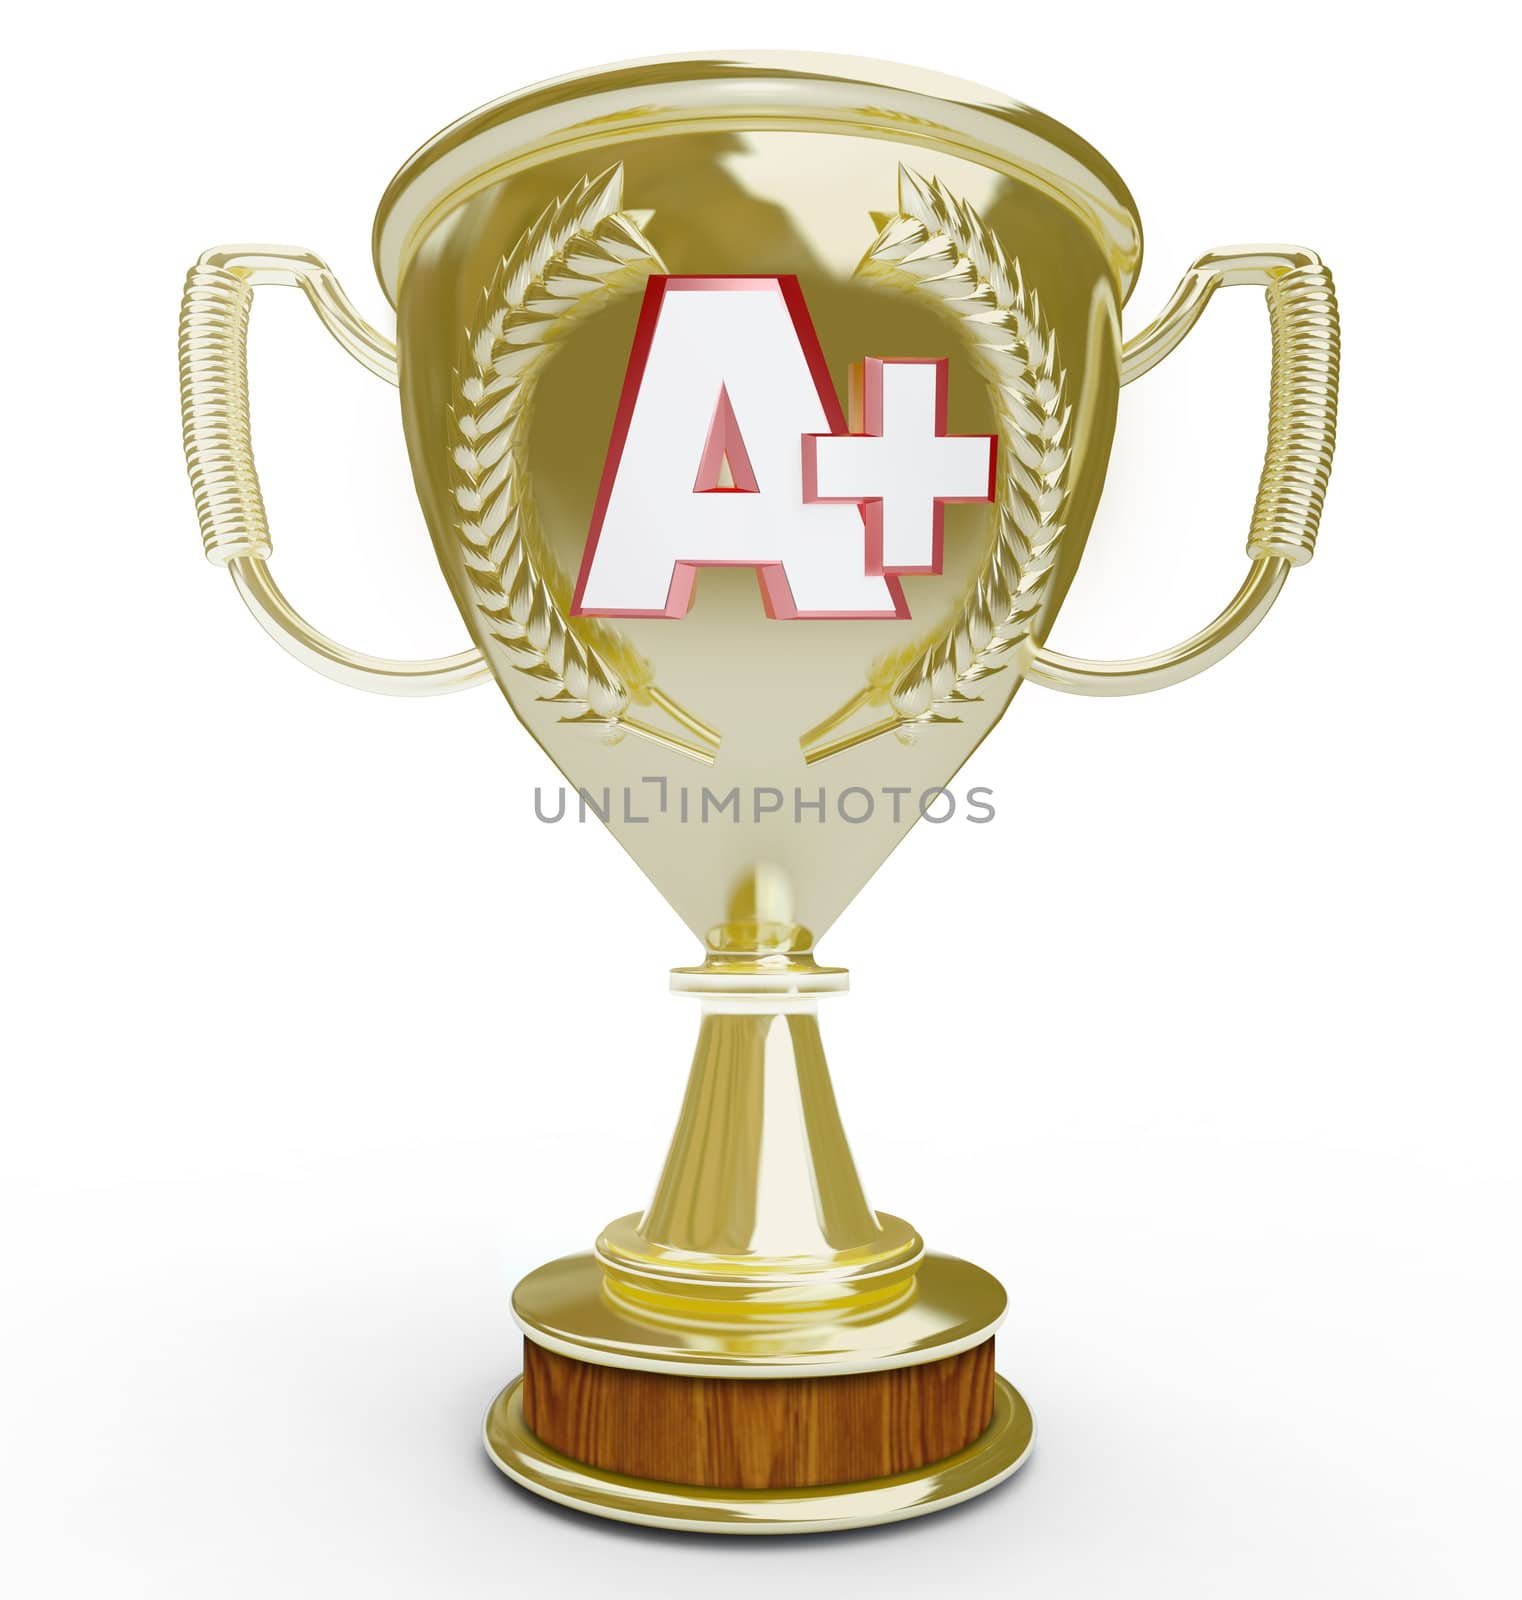 An A Plus letter grade on a golden trophy award given to the top score or first place student or competitor in a challenge or test result